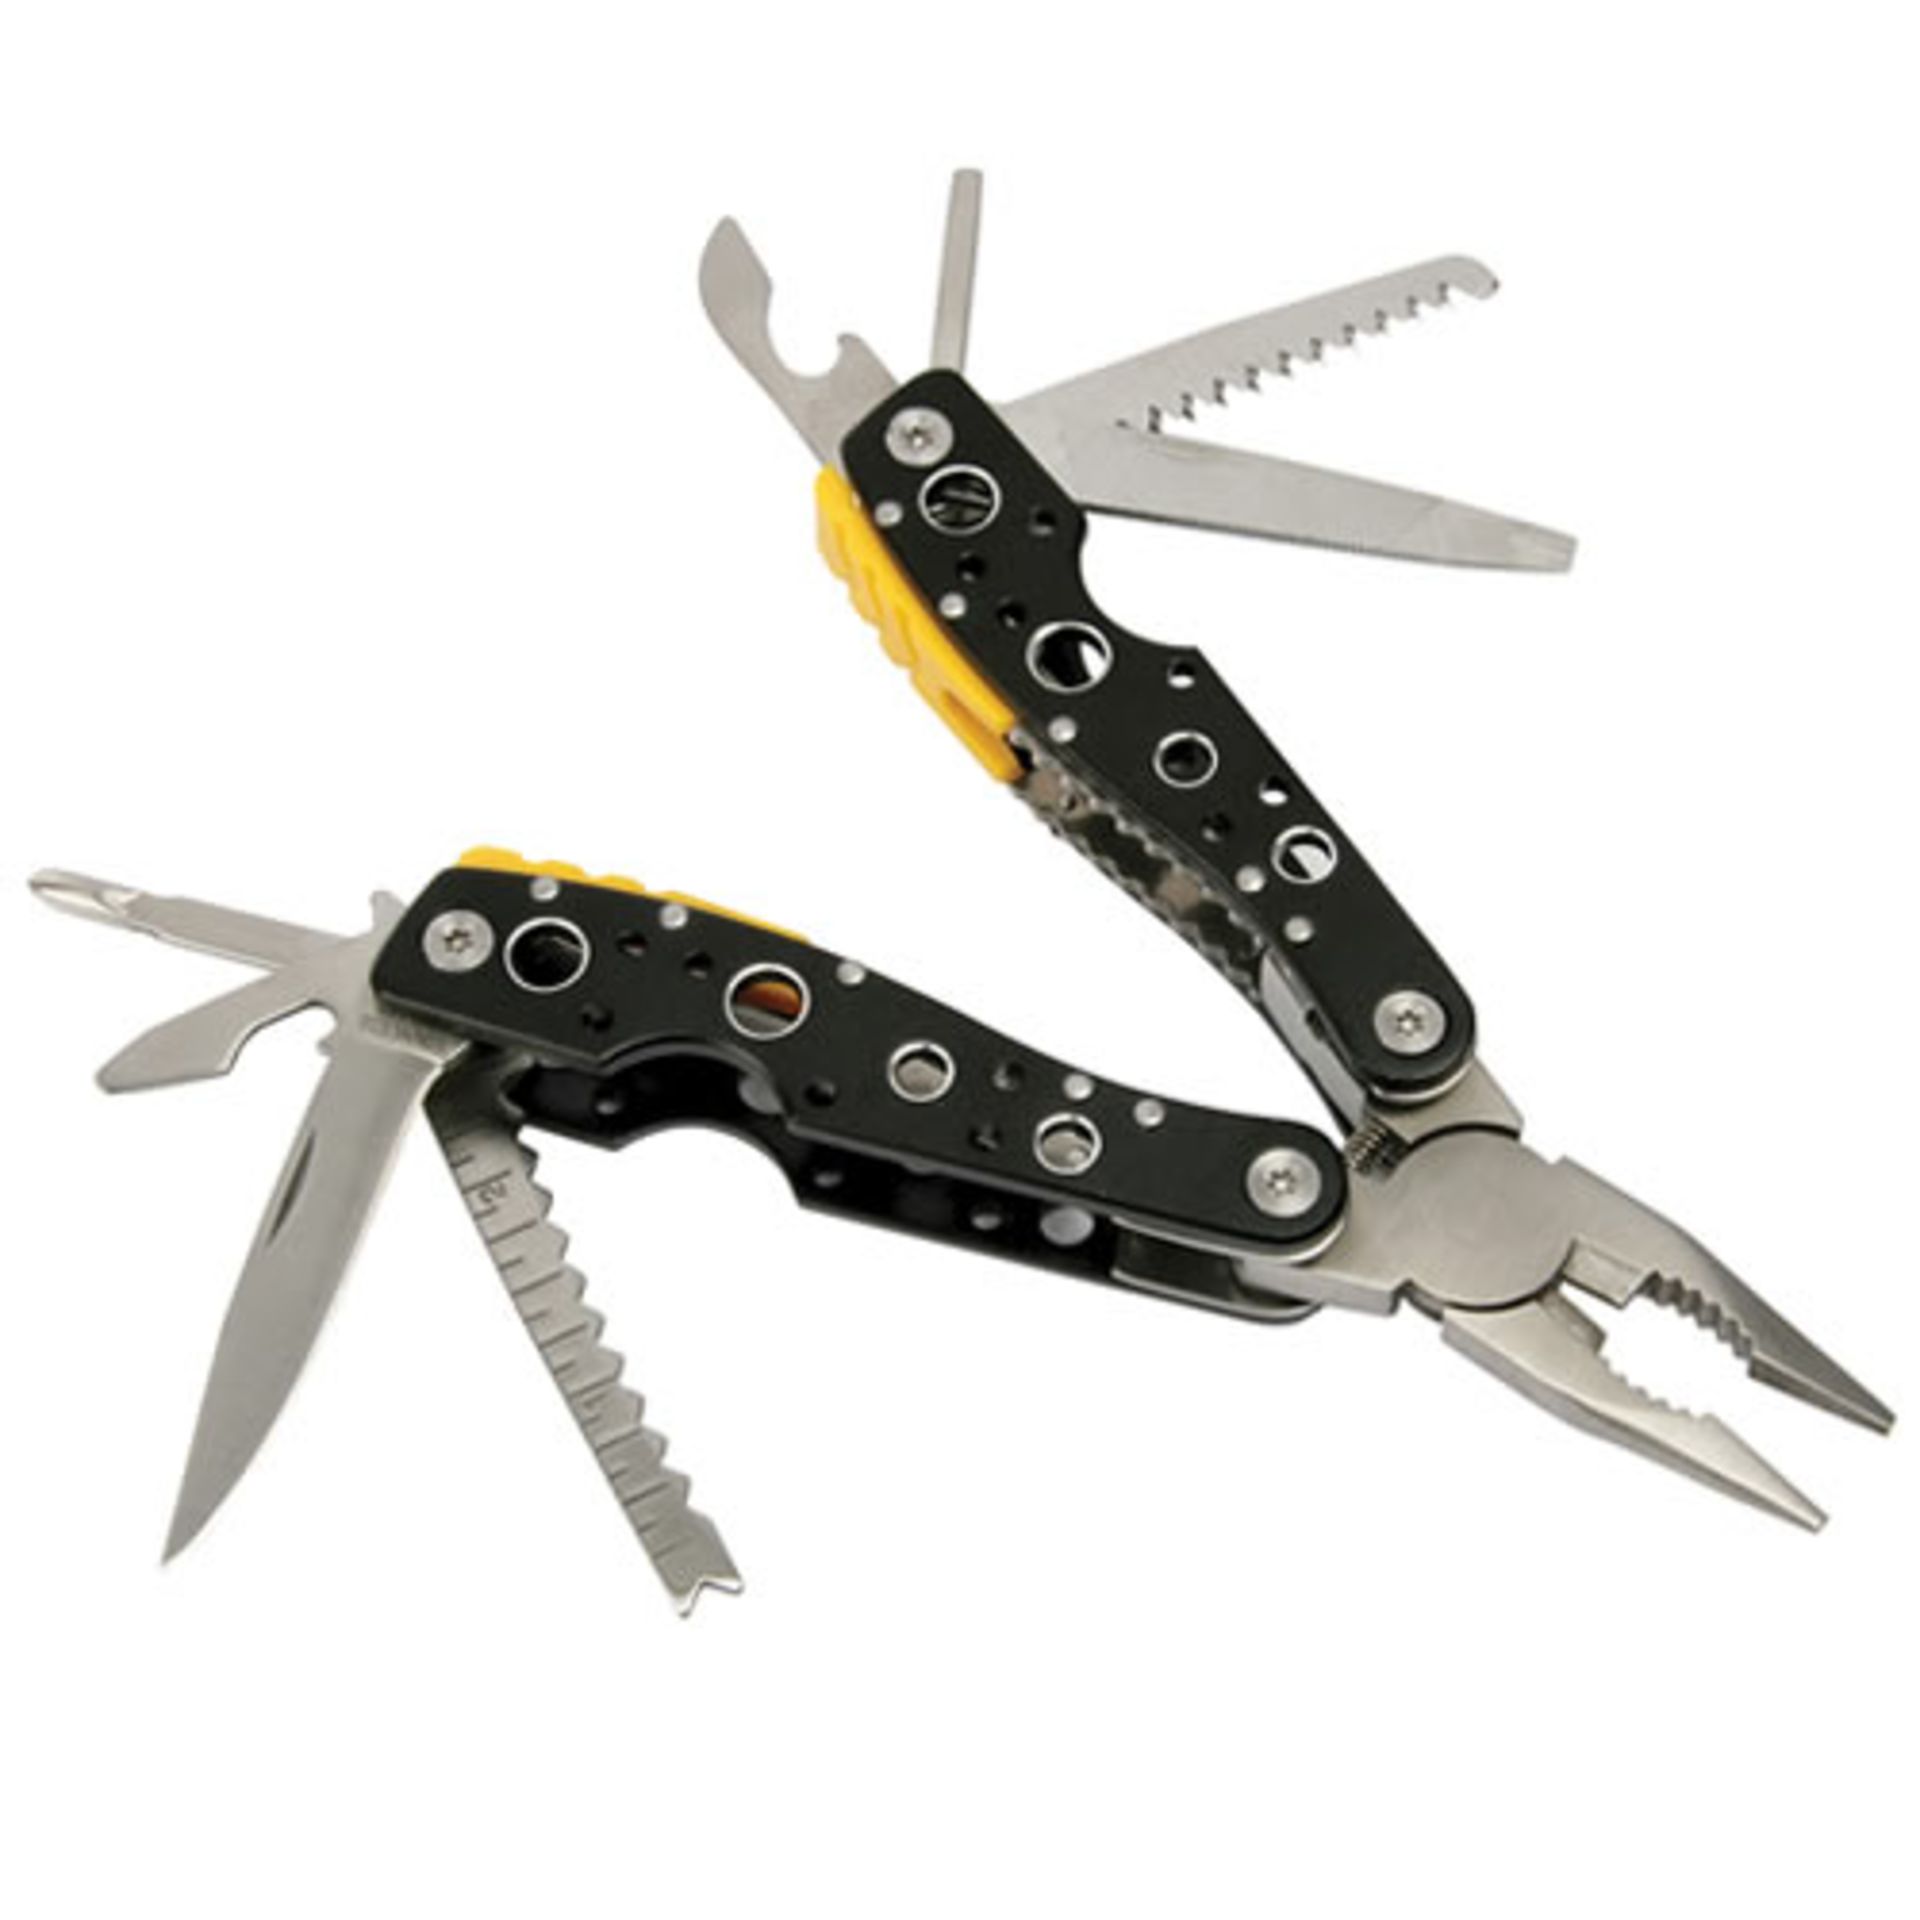 V 14 In 1 Multitool In Gift Box With Carry Pouch Aluminium Handles With Saw/Knife/Hook/Can Opener - Image 2 of 2